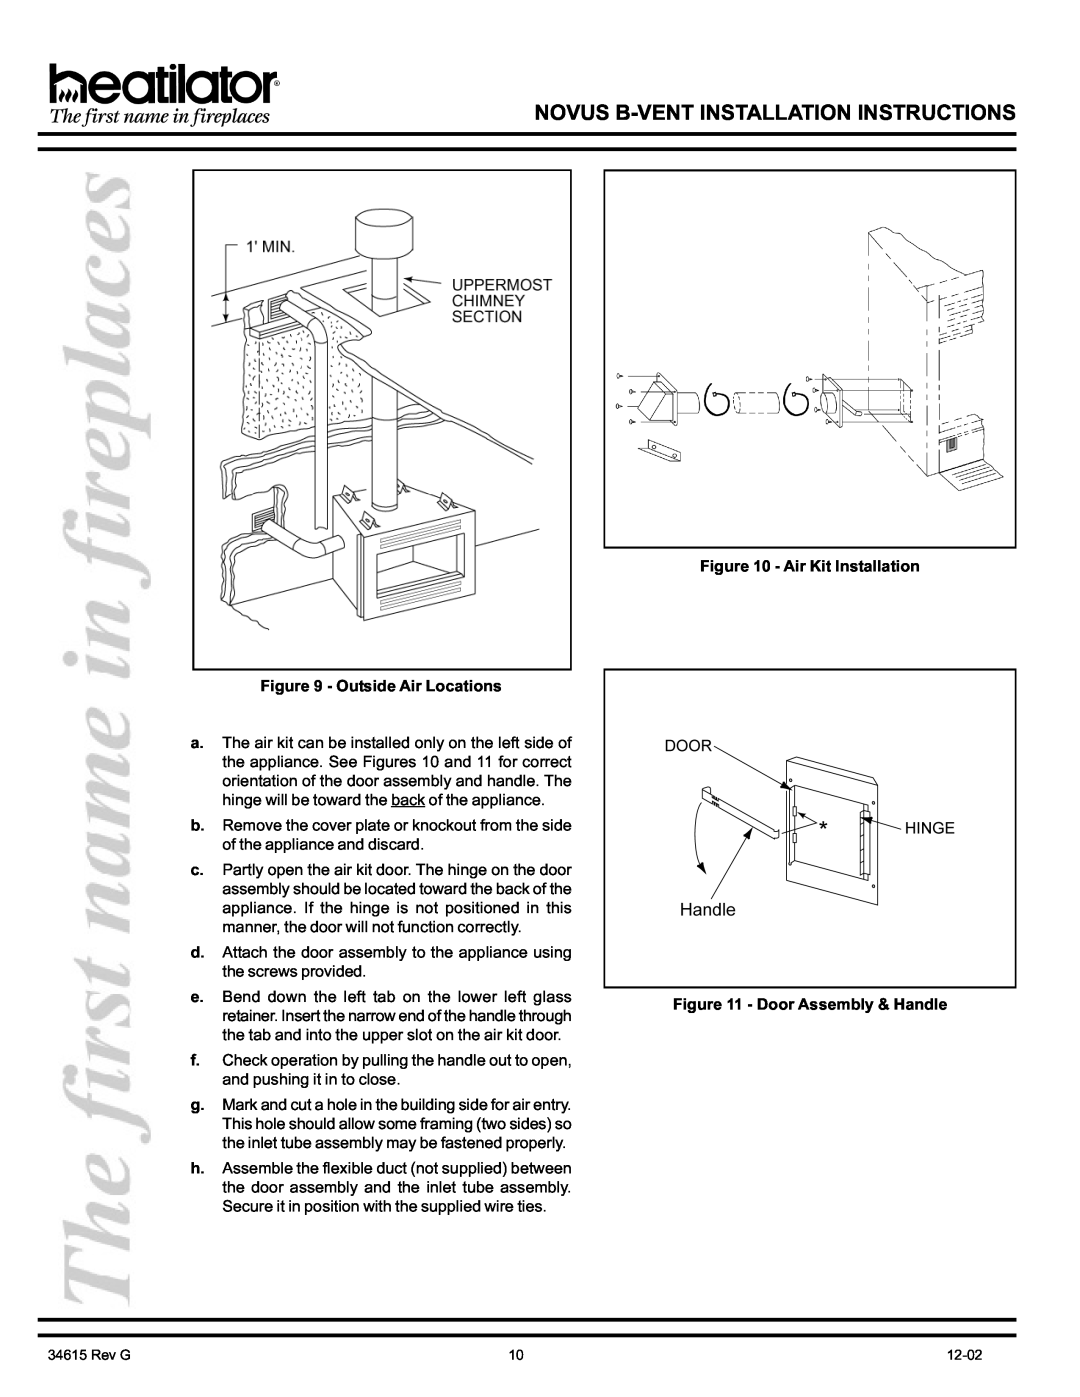 Hearth and Home Technologies GNBC36 Novus B-Ventinstallation Instructions, Outside Air Locations, Air Kit Installation 